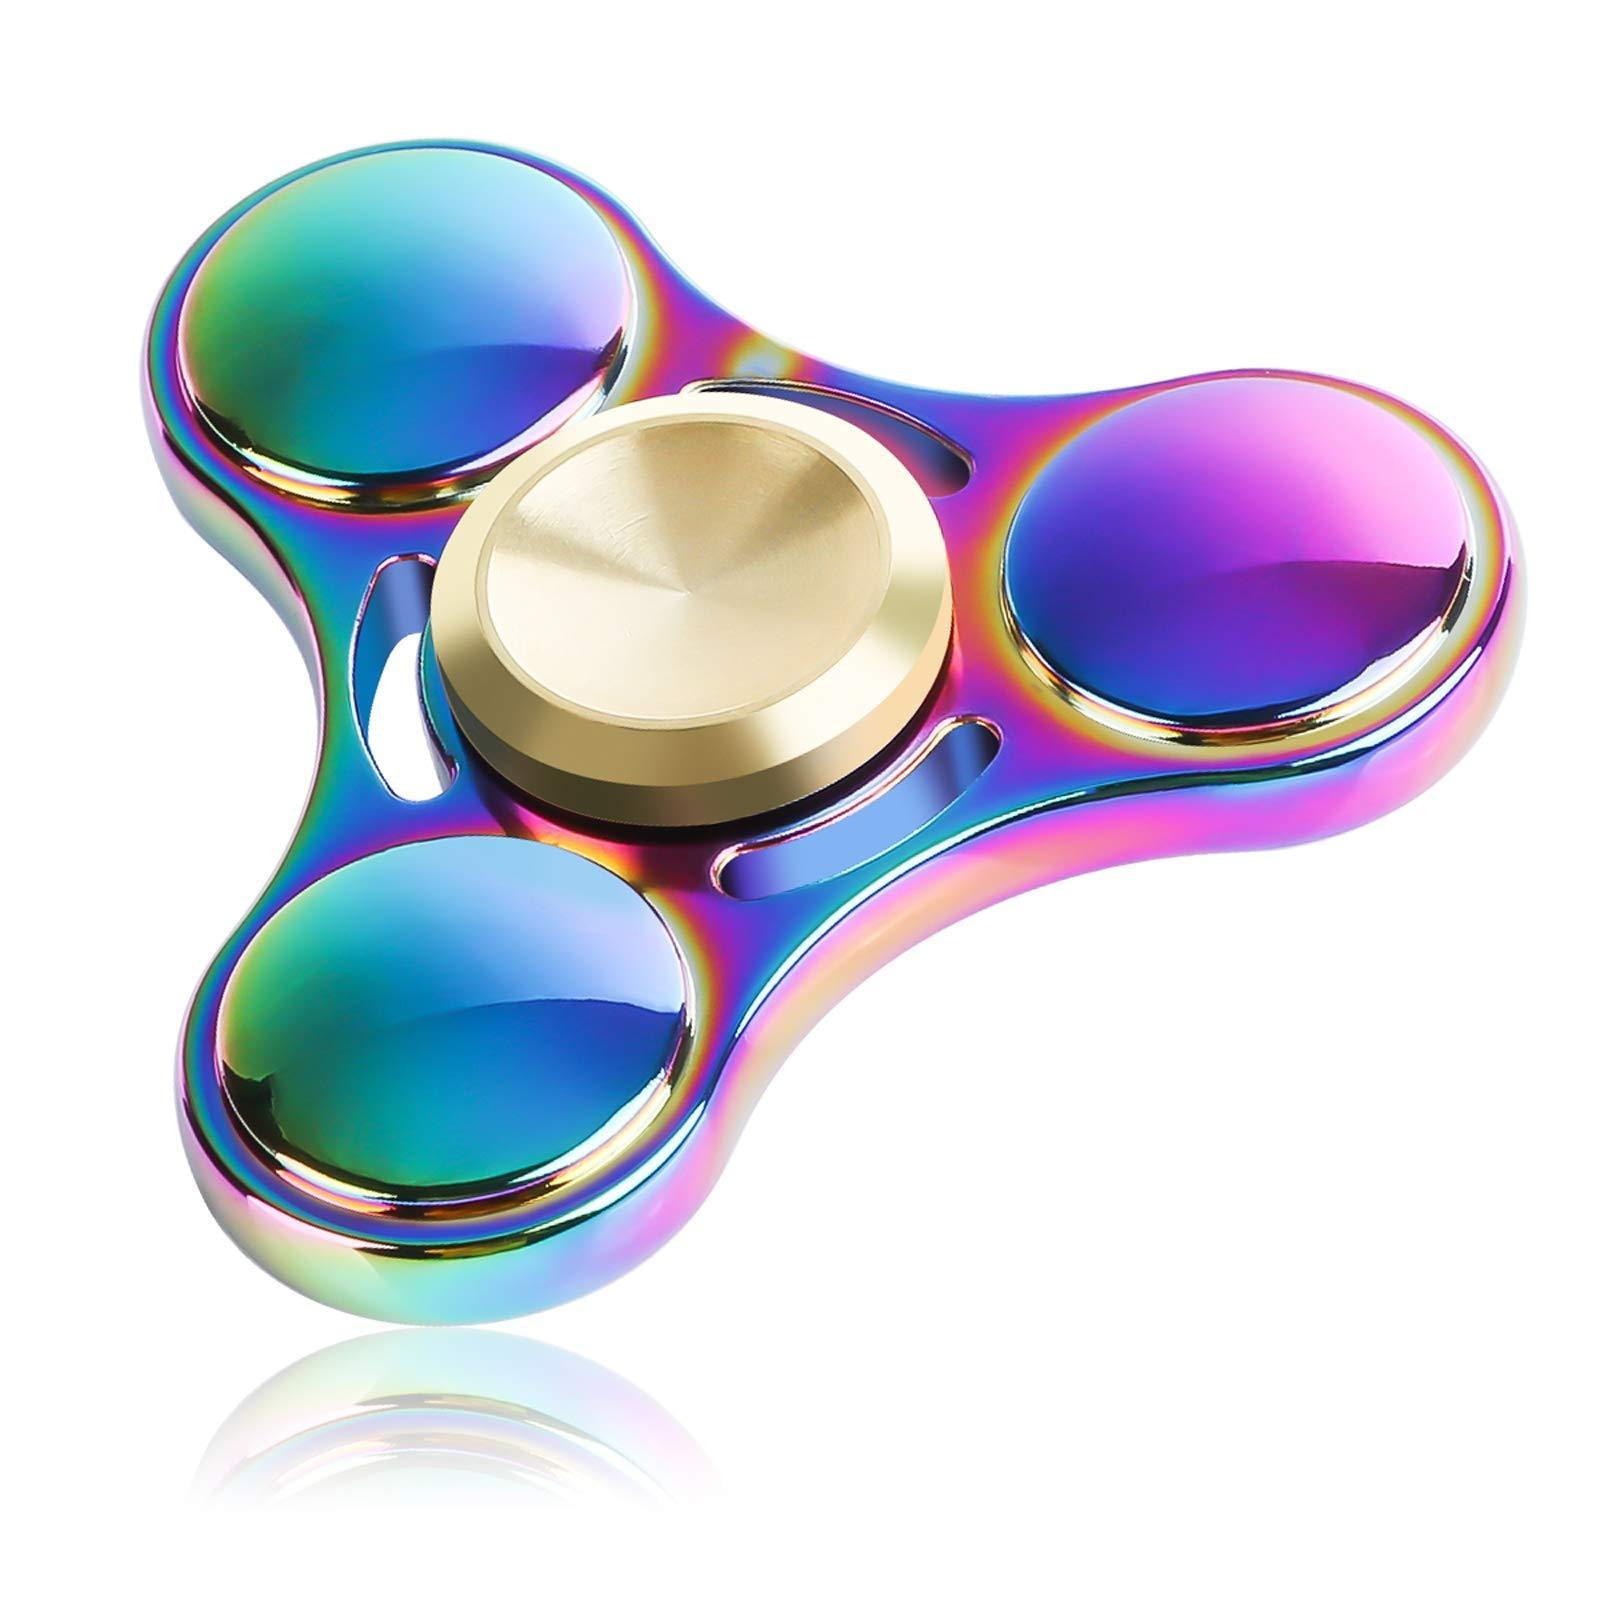 ATESSON Fidget Spinner Toy Ultra Durable Stainless Steel Bearing High Speed 2... 